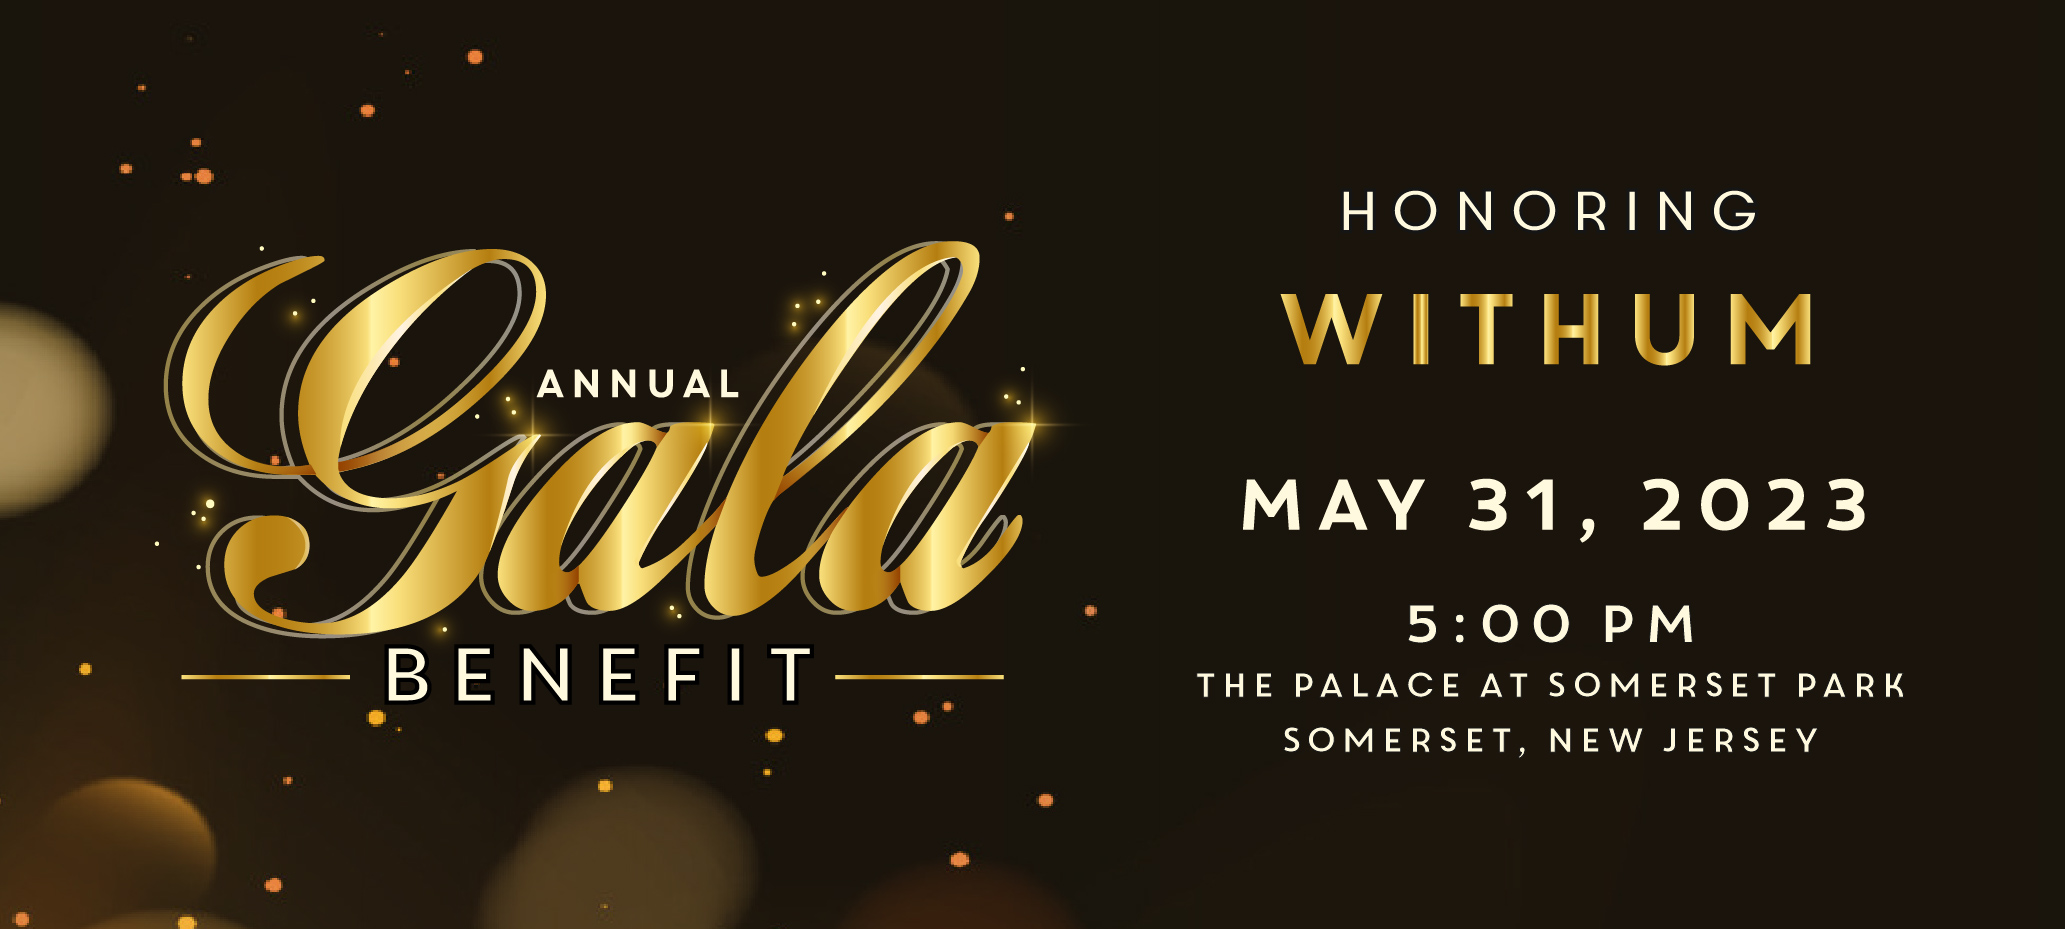 Annual Gala Benefit Honoring Withum